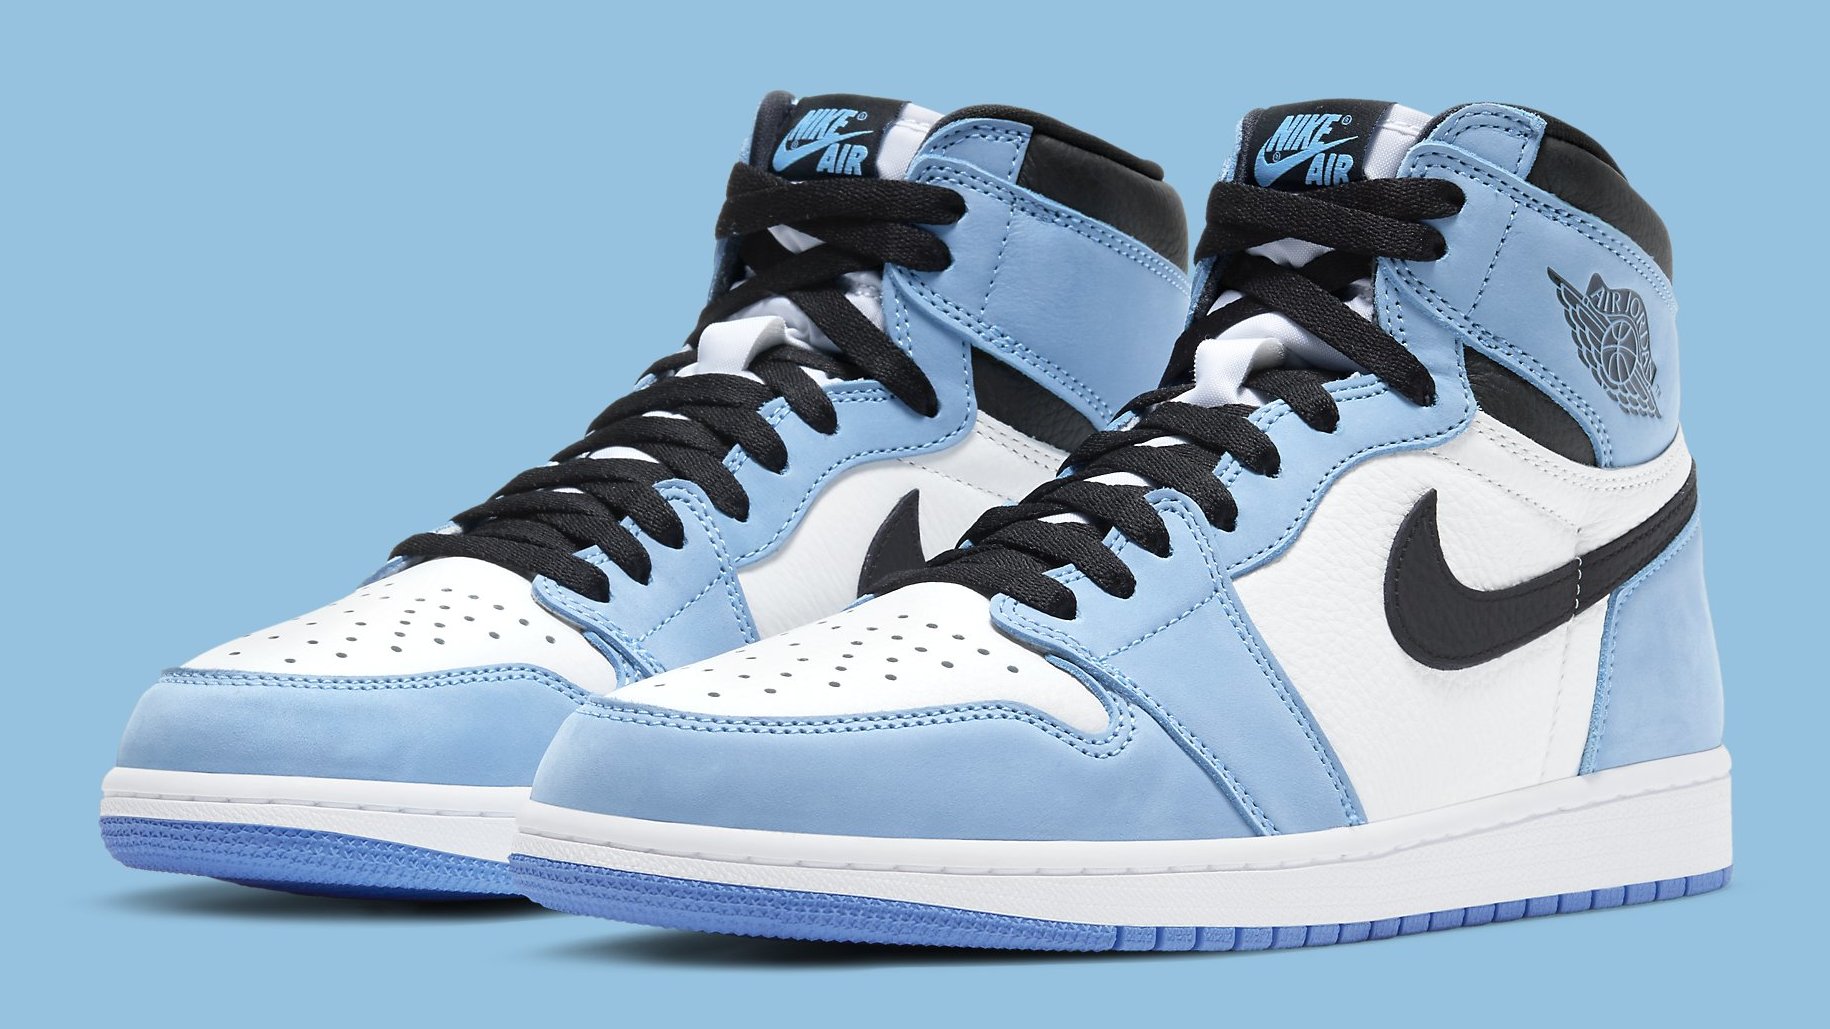 University Blue' Air Jordan 1 Highs Are Releasing in March | Complex